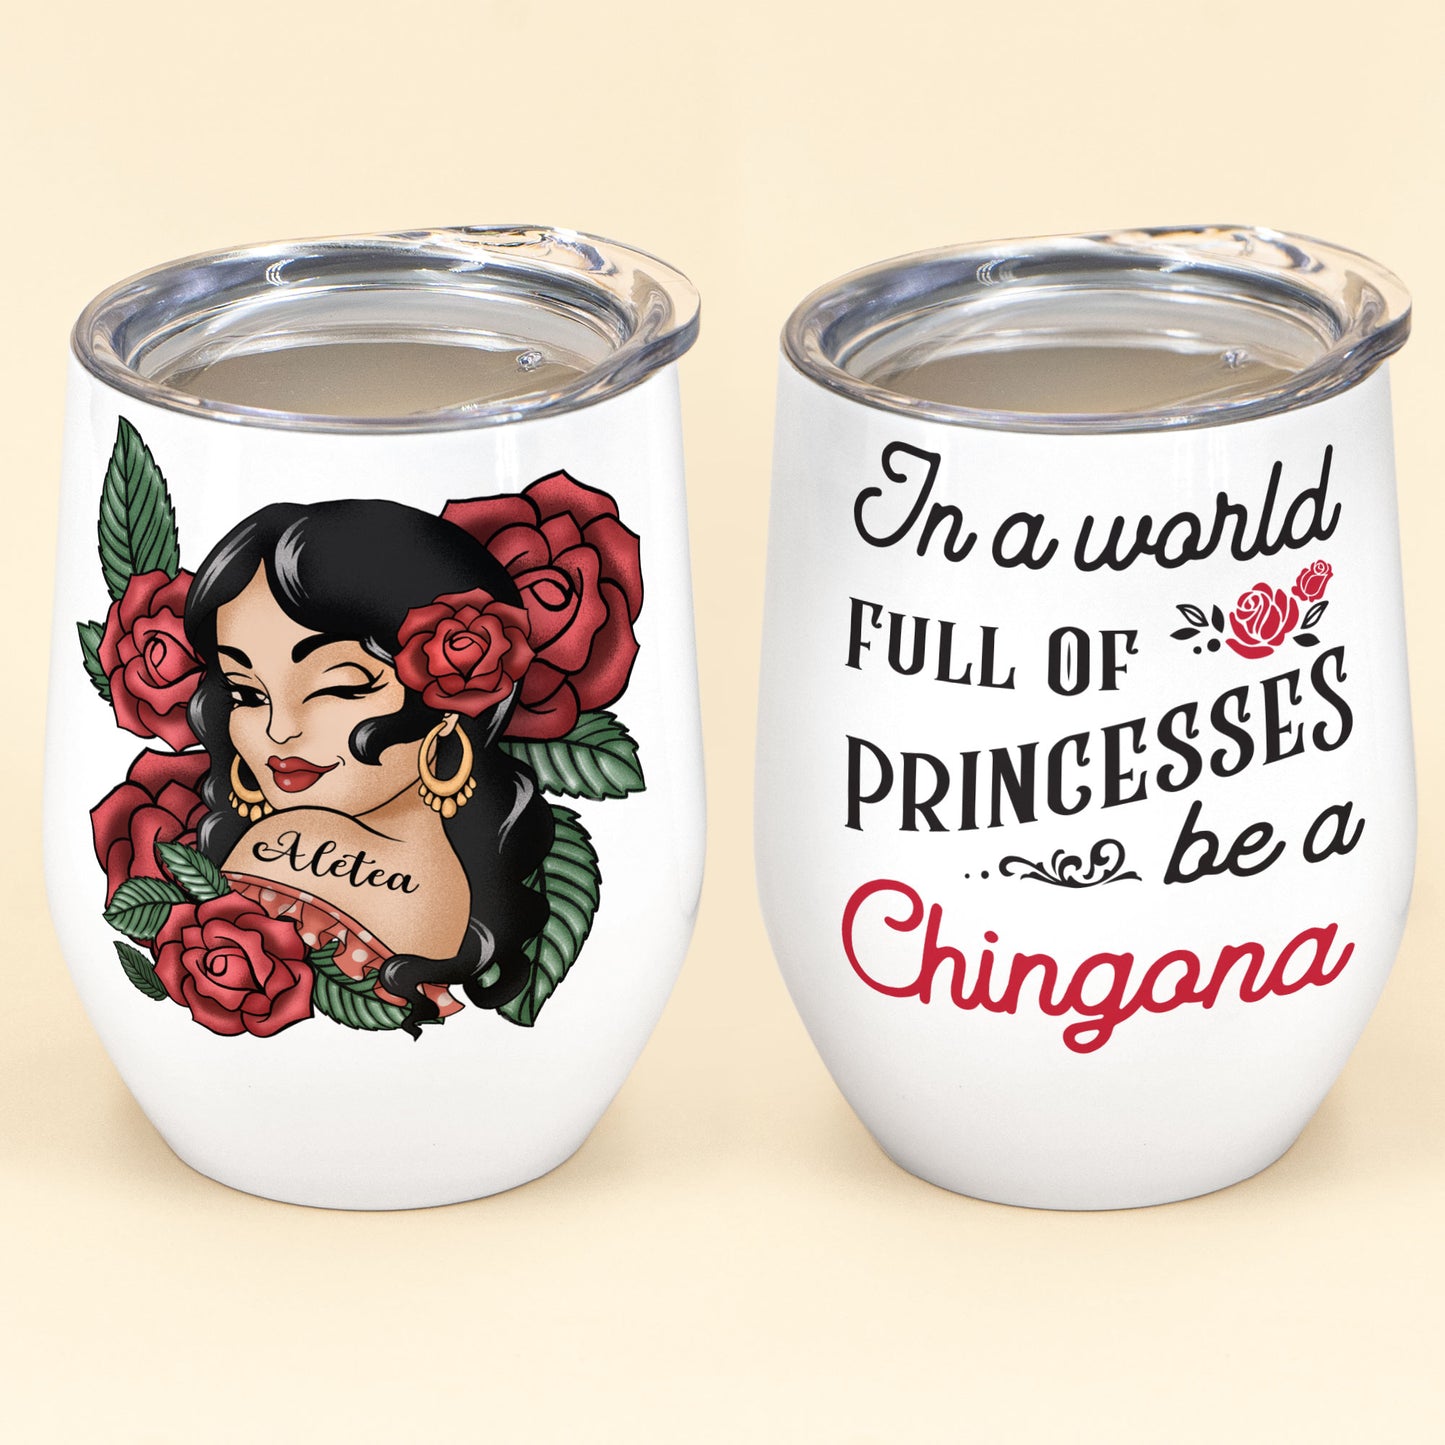 Always Chingona Sometimes Cabrona But Never Pendeja - Personalized Wine Tumbler  - Vintage Girl